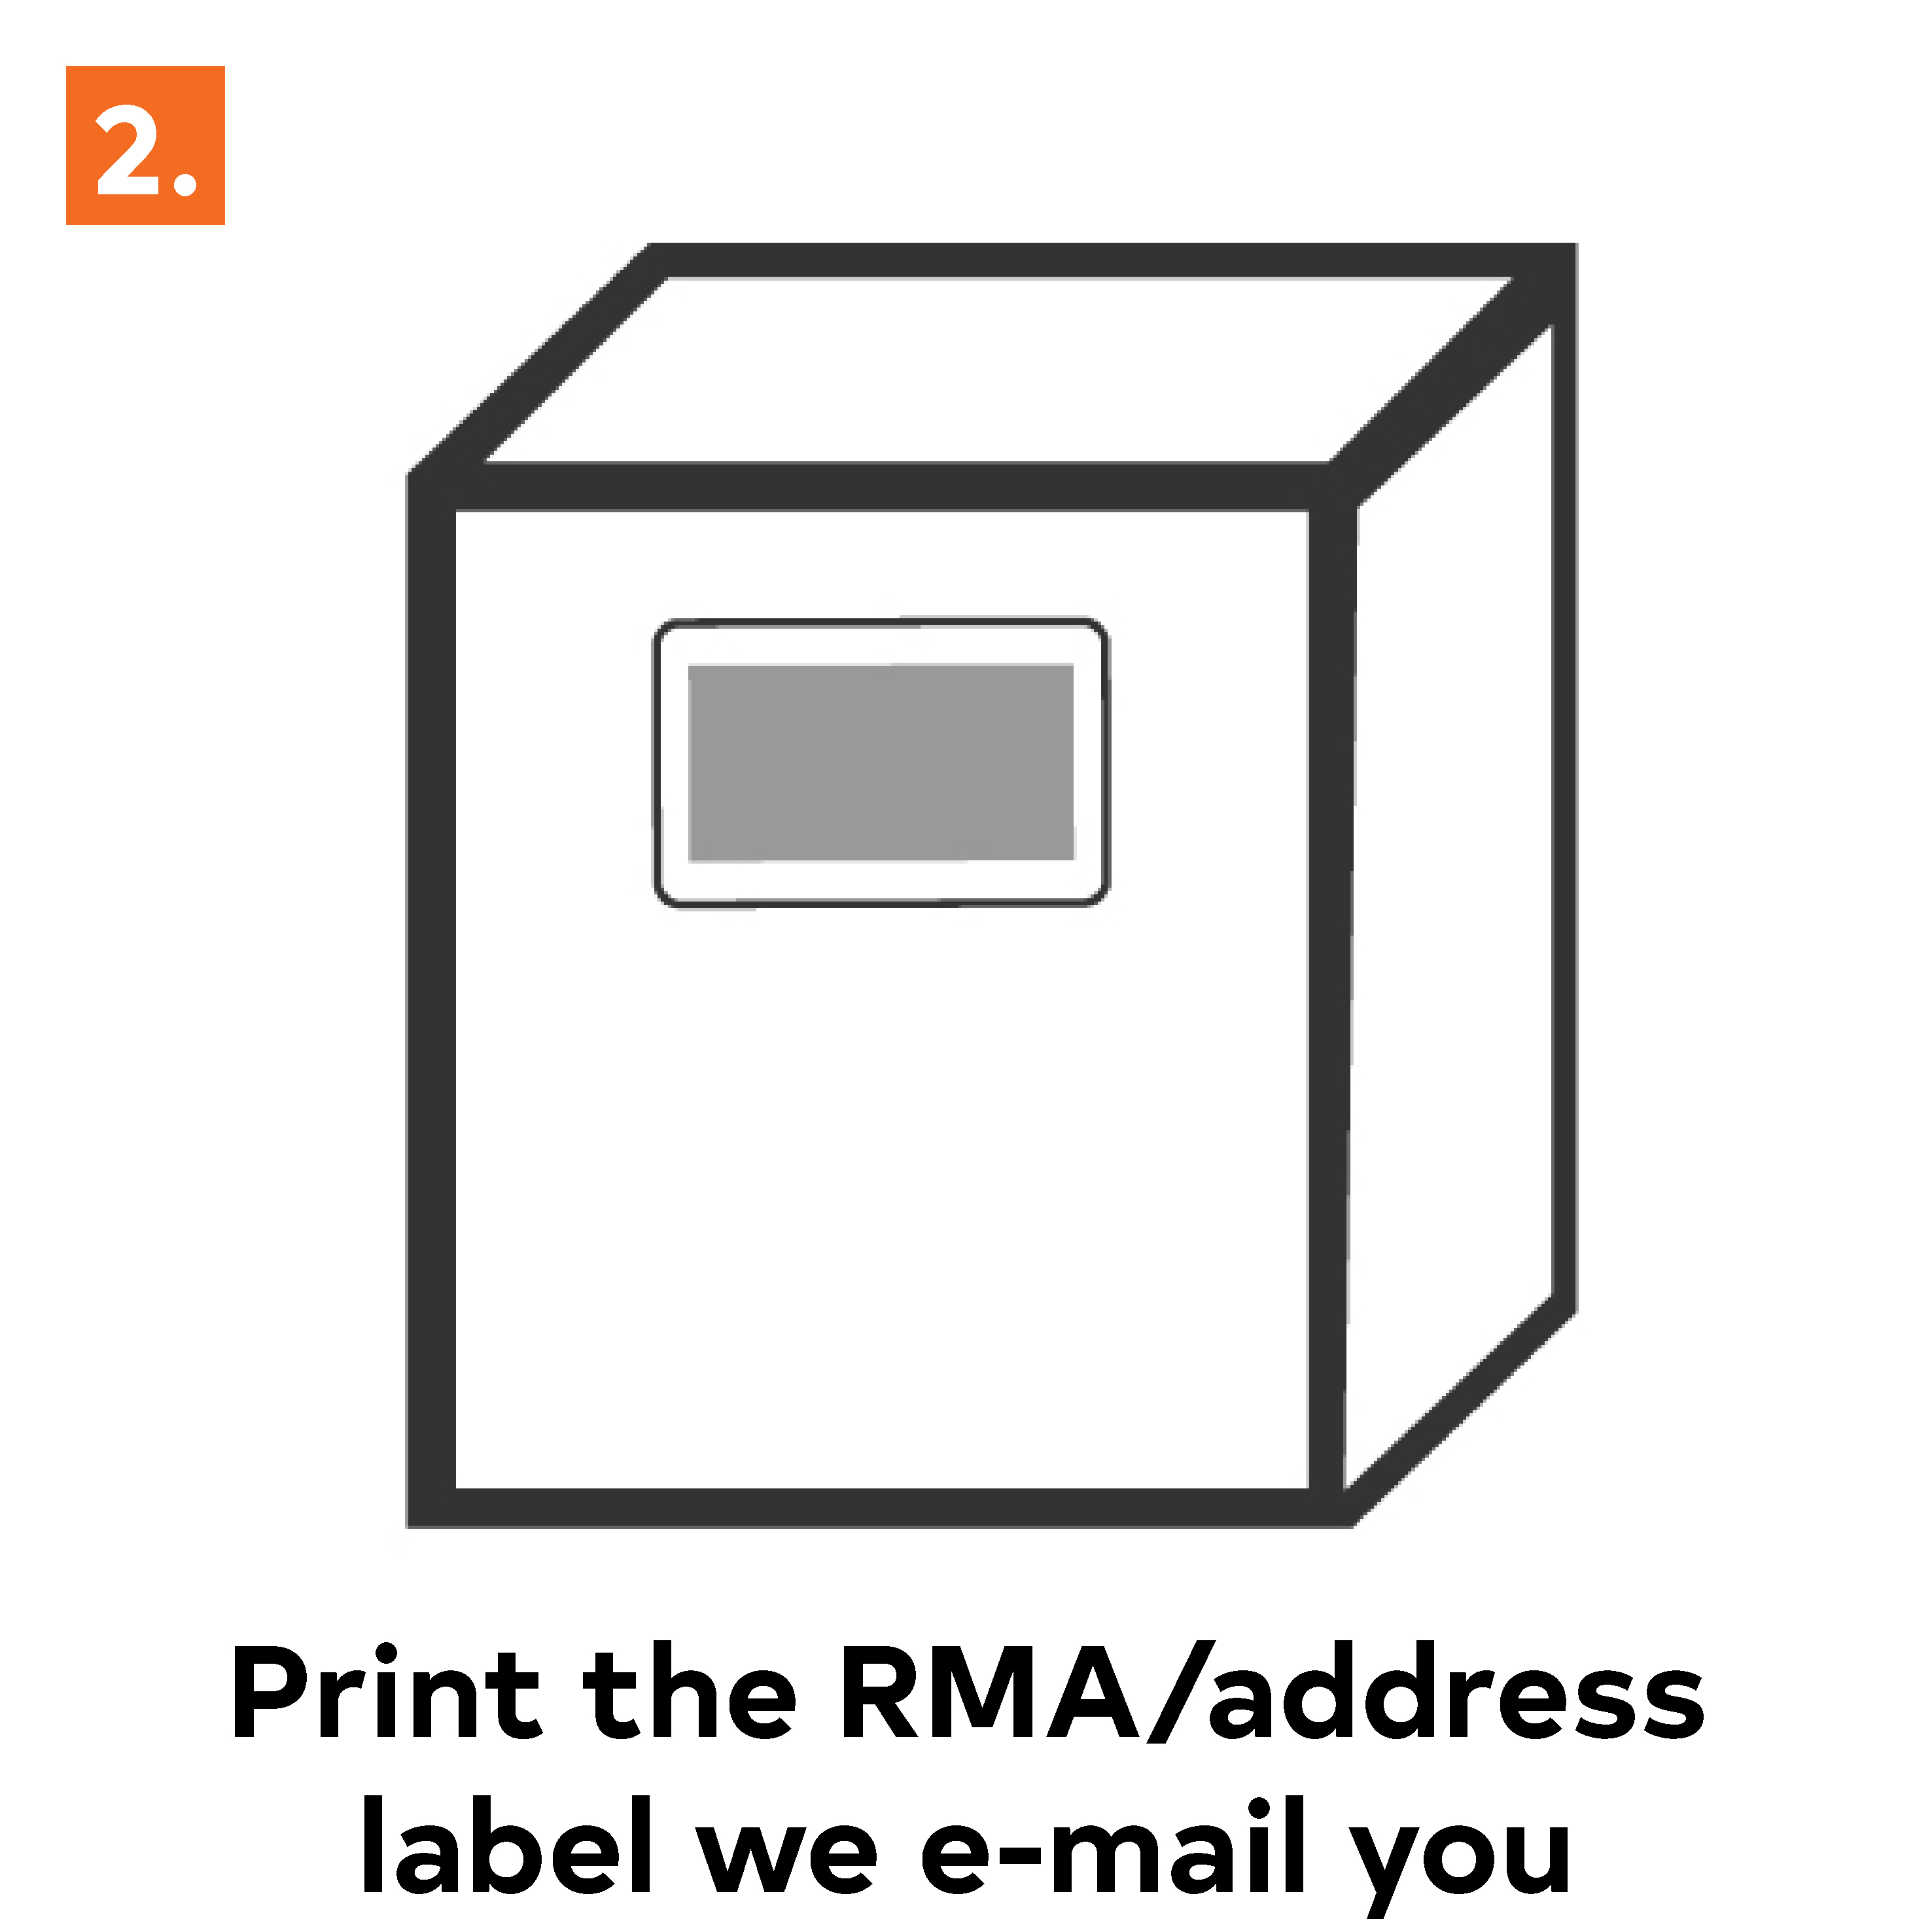 print-the-address-label-we-email-you